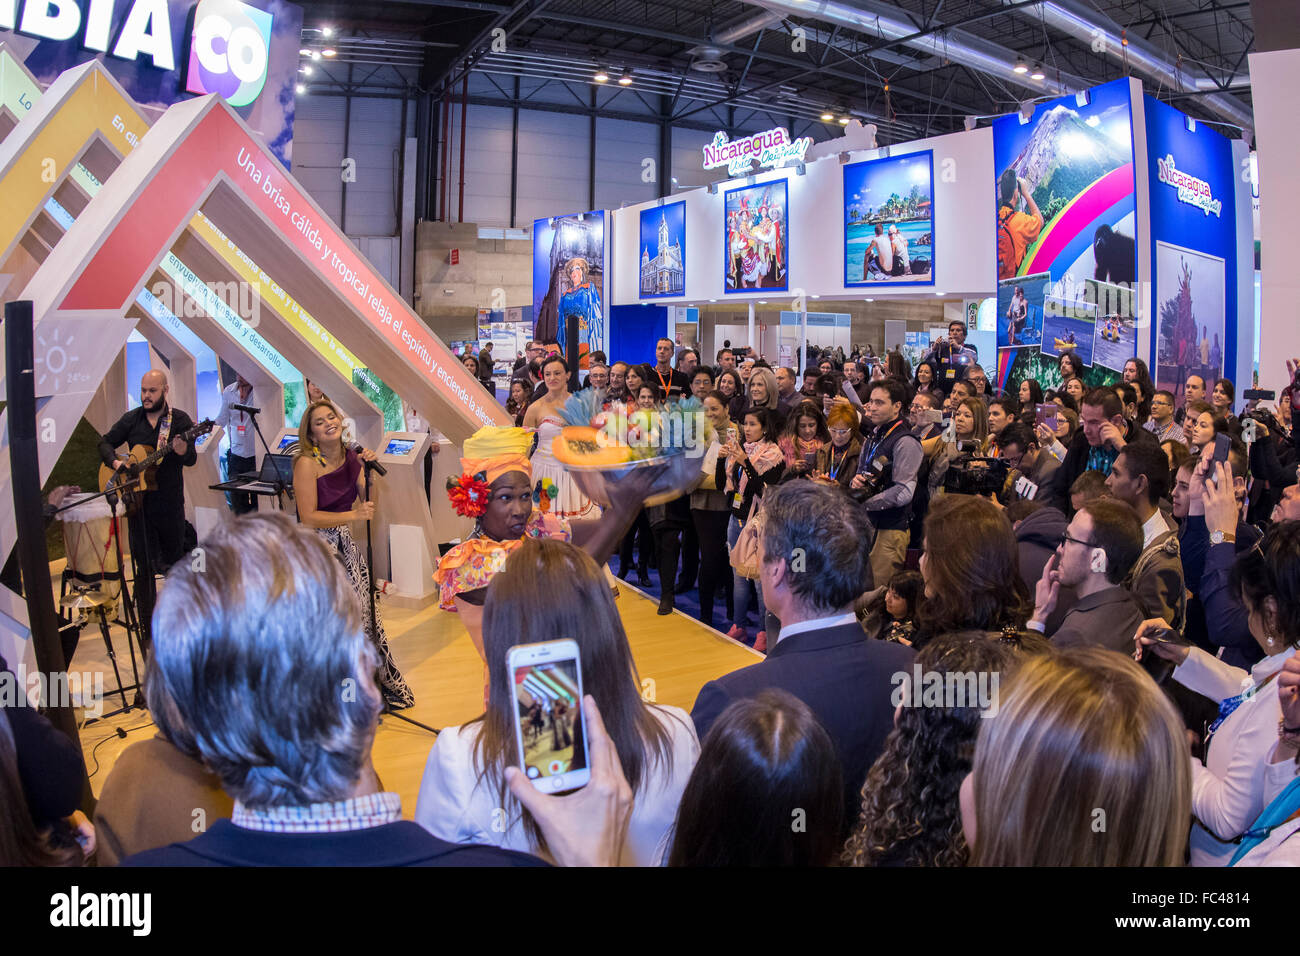 Madrid, Spain. 20th January, 2016. Fitur, International Travel and Tourism Fair, at IFEMA. Credit:  ABEL F. ROS / Alamy Live News. Stock Photo